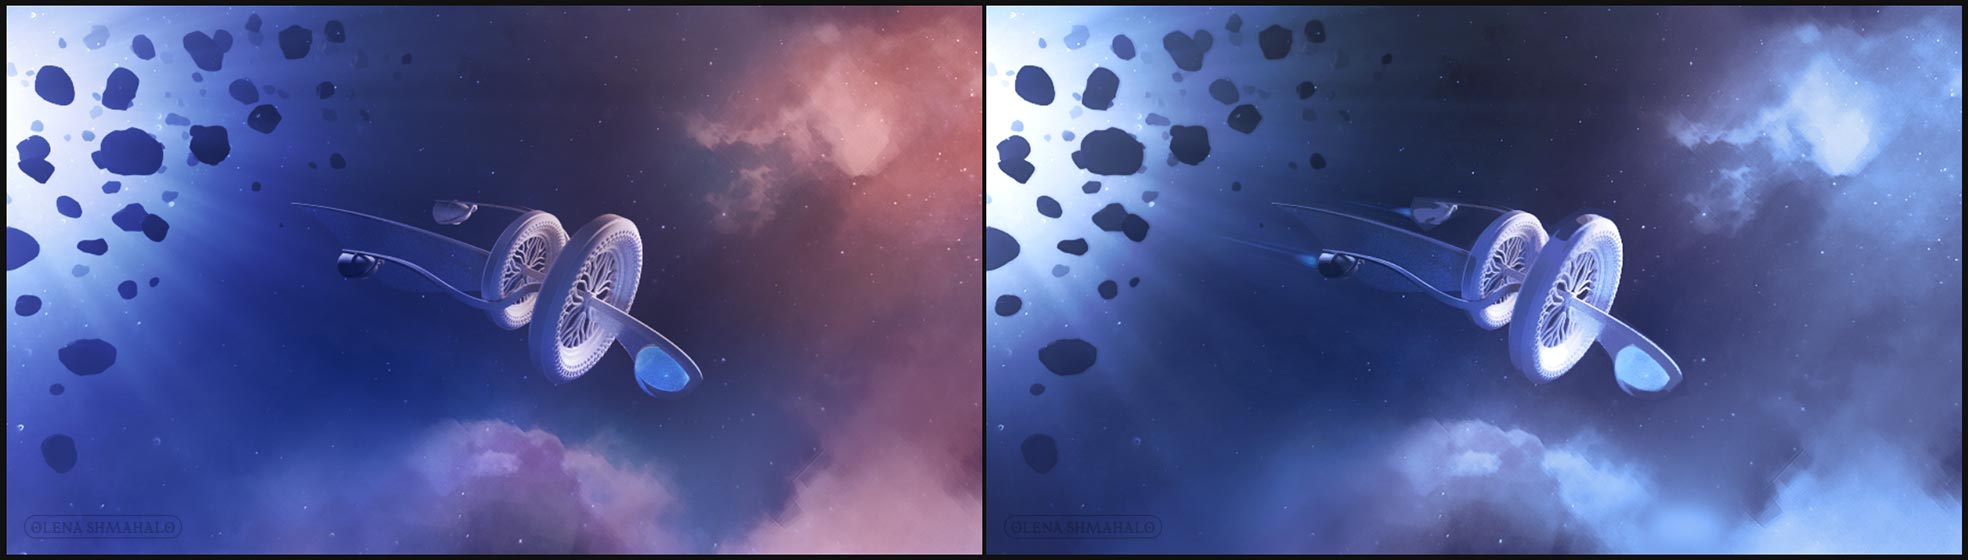 Rough color comps of a starship flying out of an asteroid field and into a colorful molecular cloud. Art by Olena Shmahalo for Symmetry Magazine.